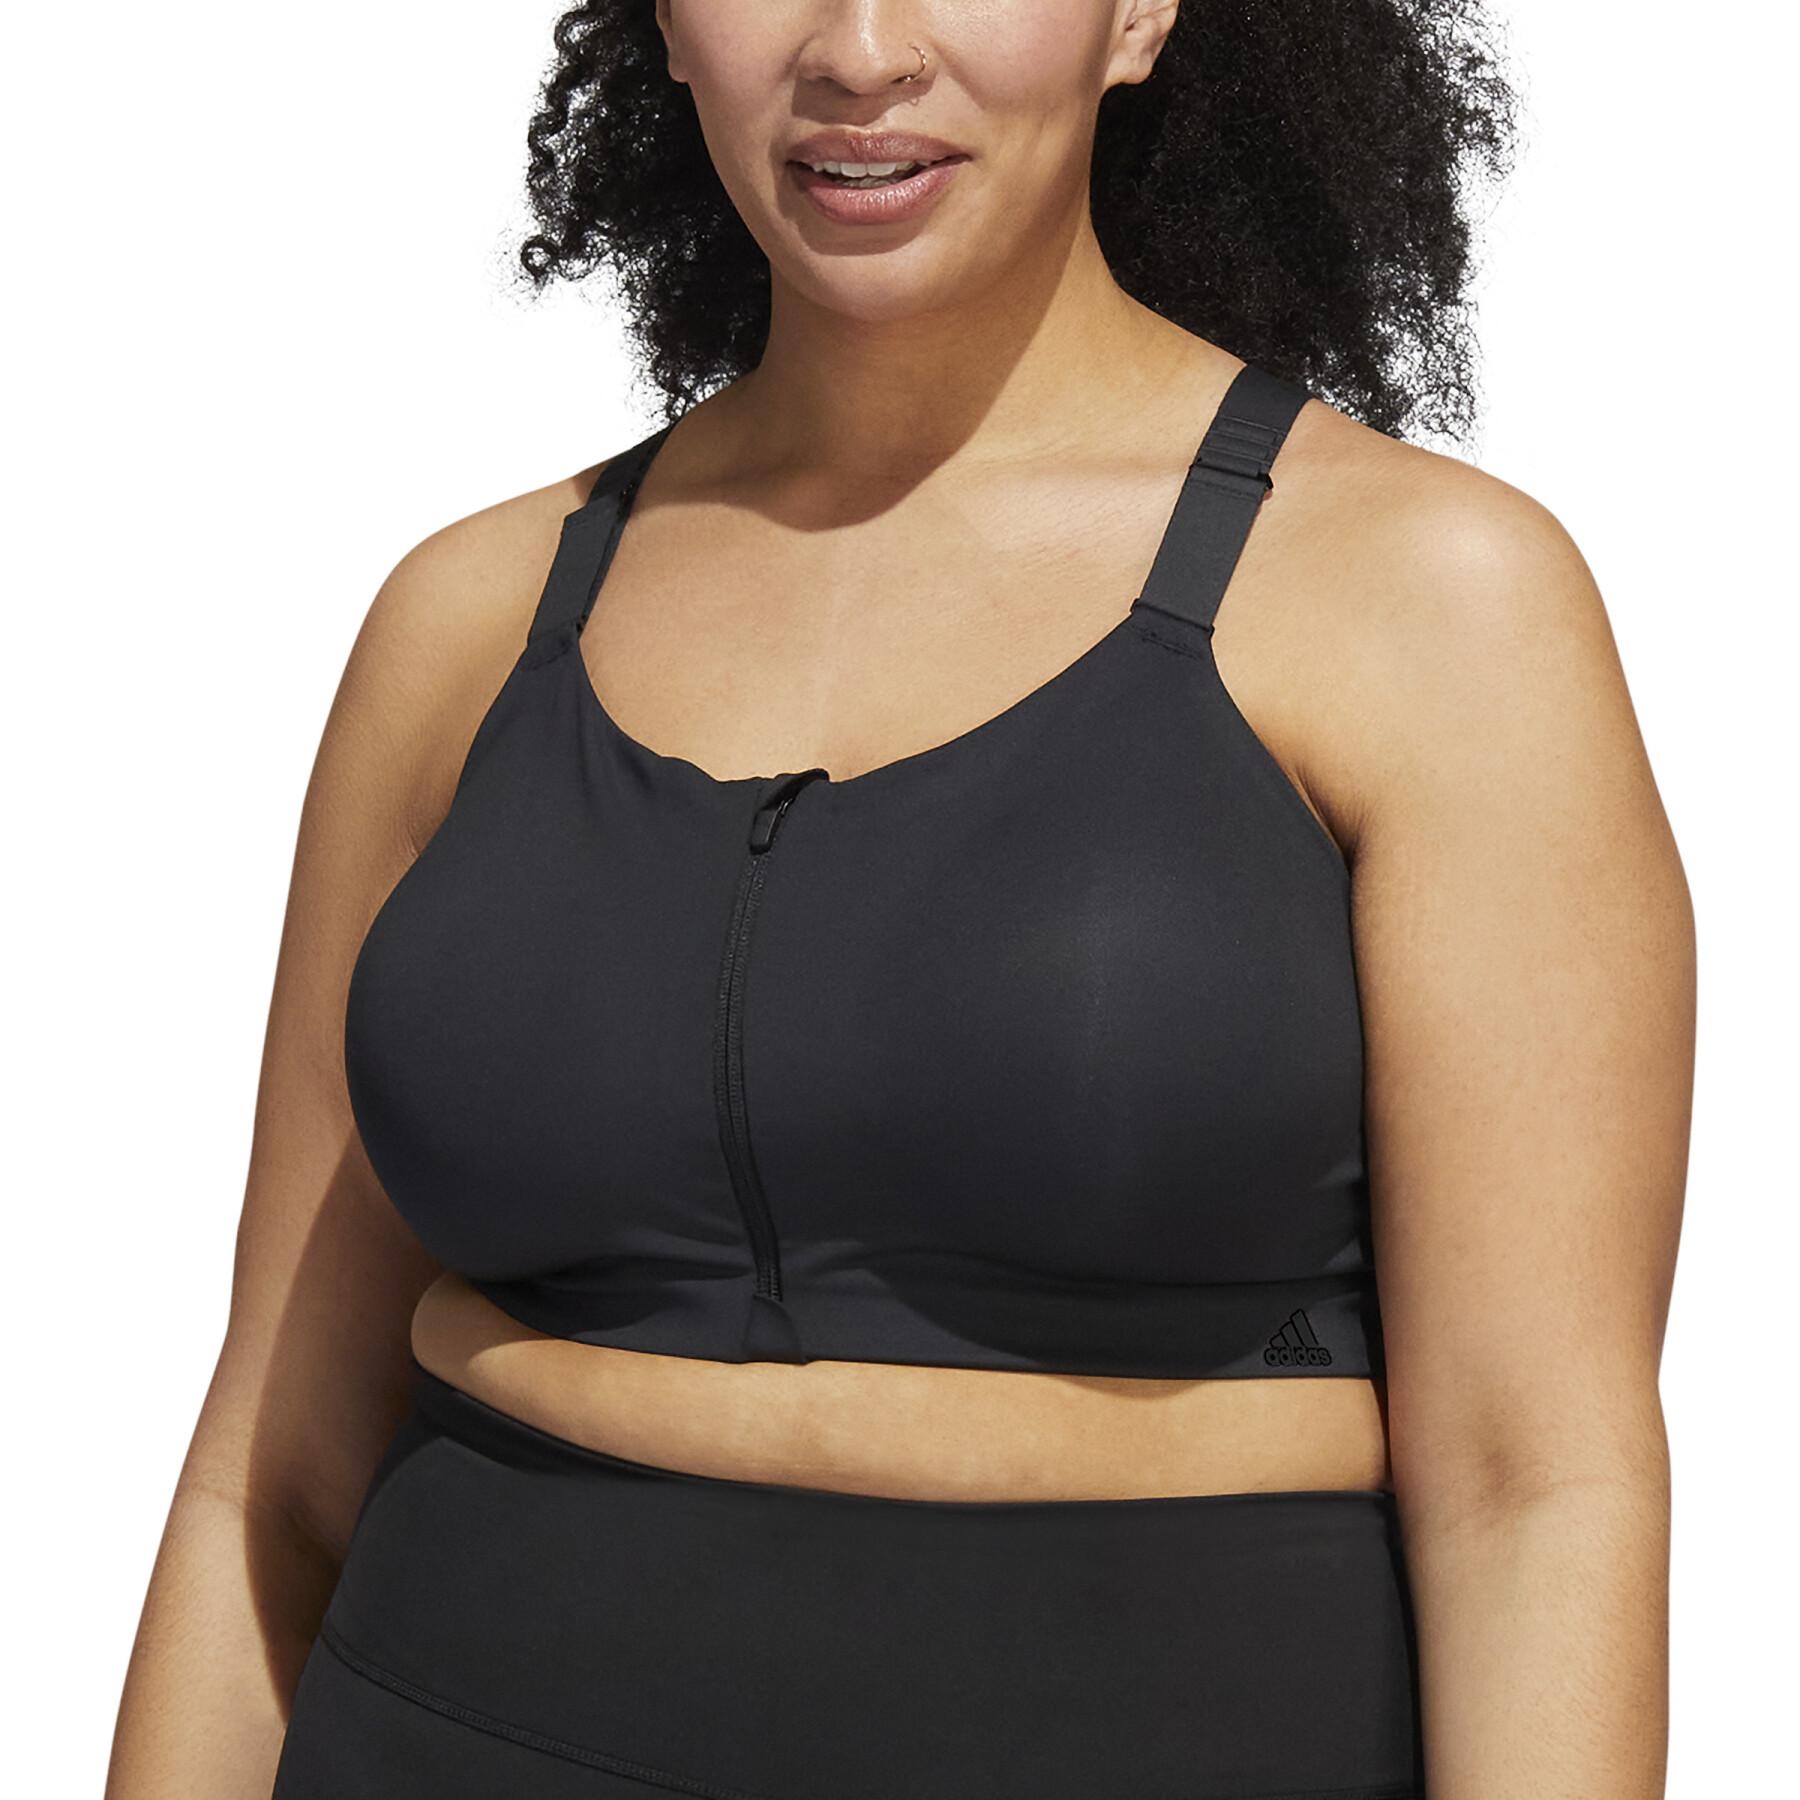 Brassière Damen adidas TLRD Impact Luxe Training High-Support